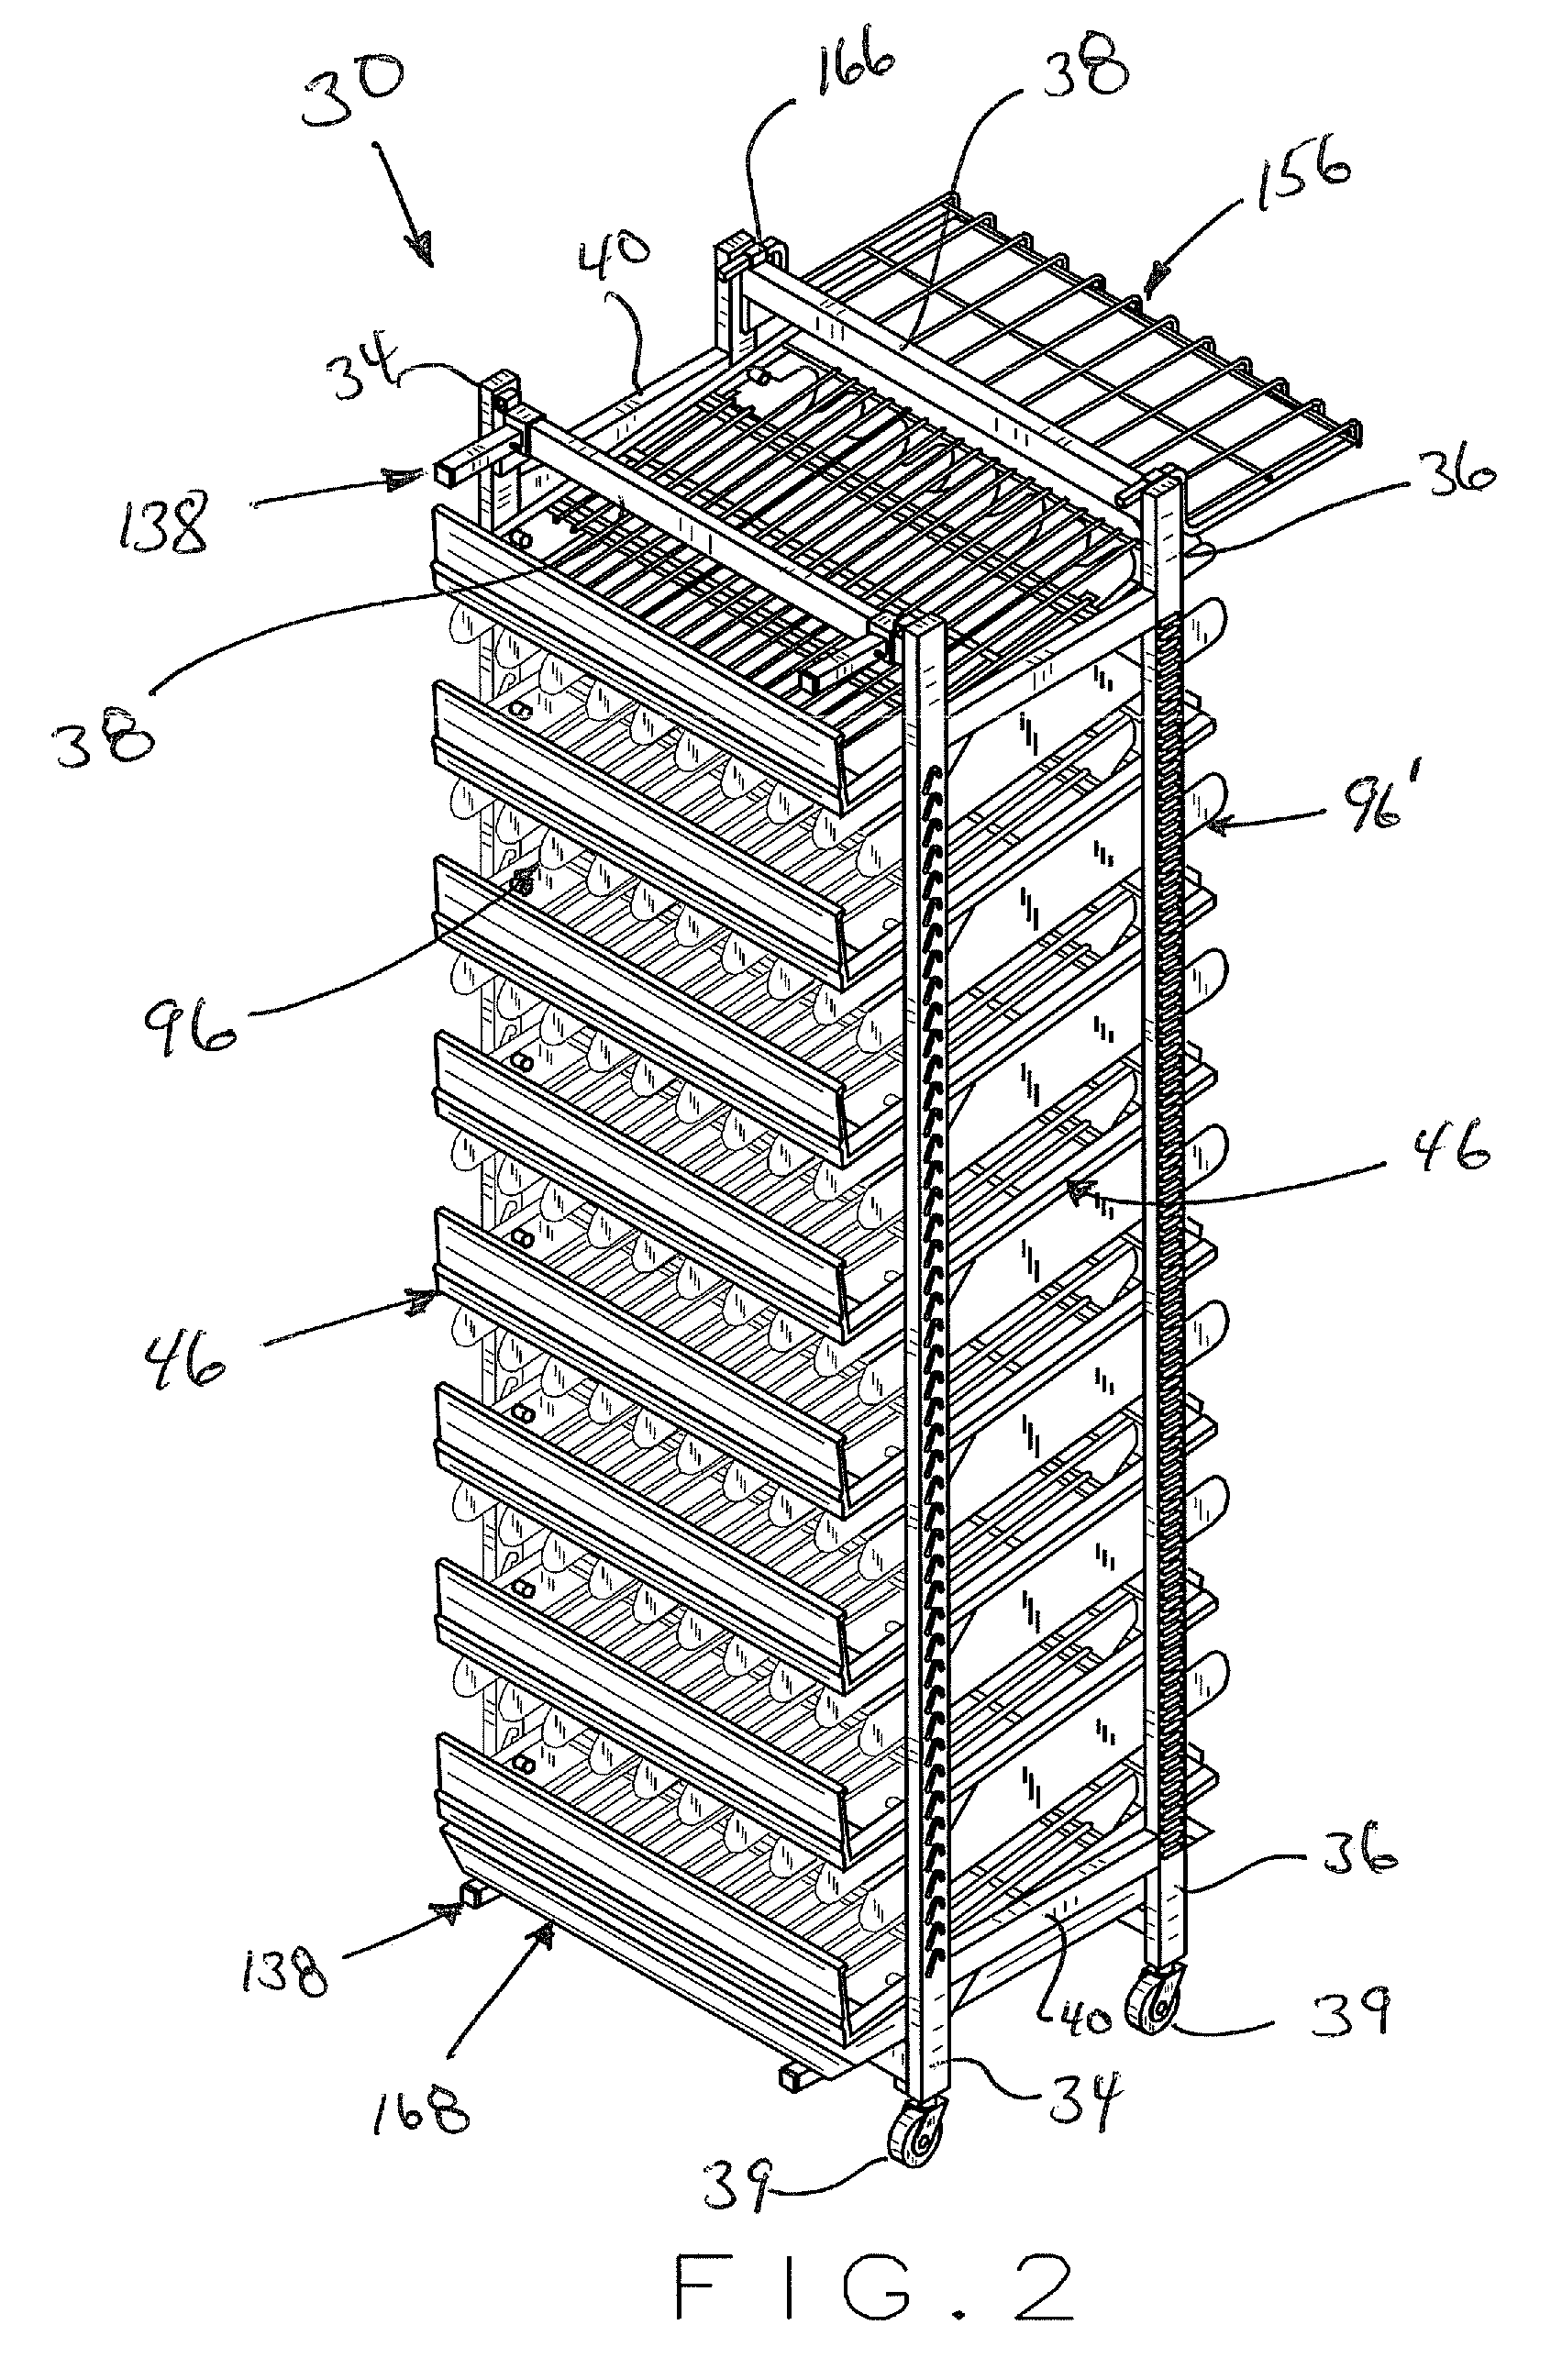 Product merchandising system for walk-in display coolers and the like